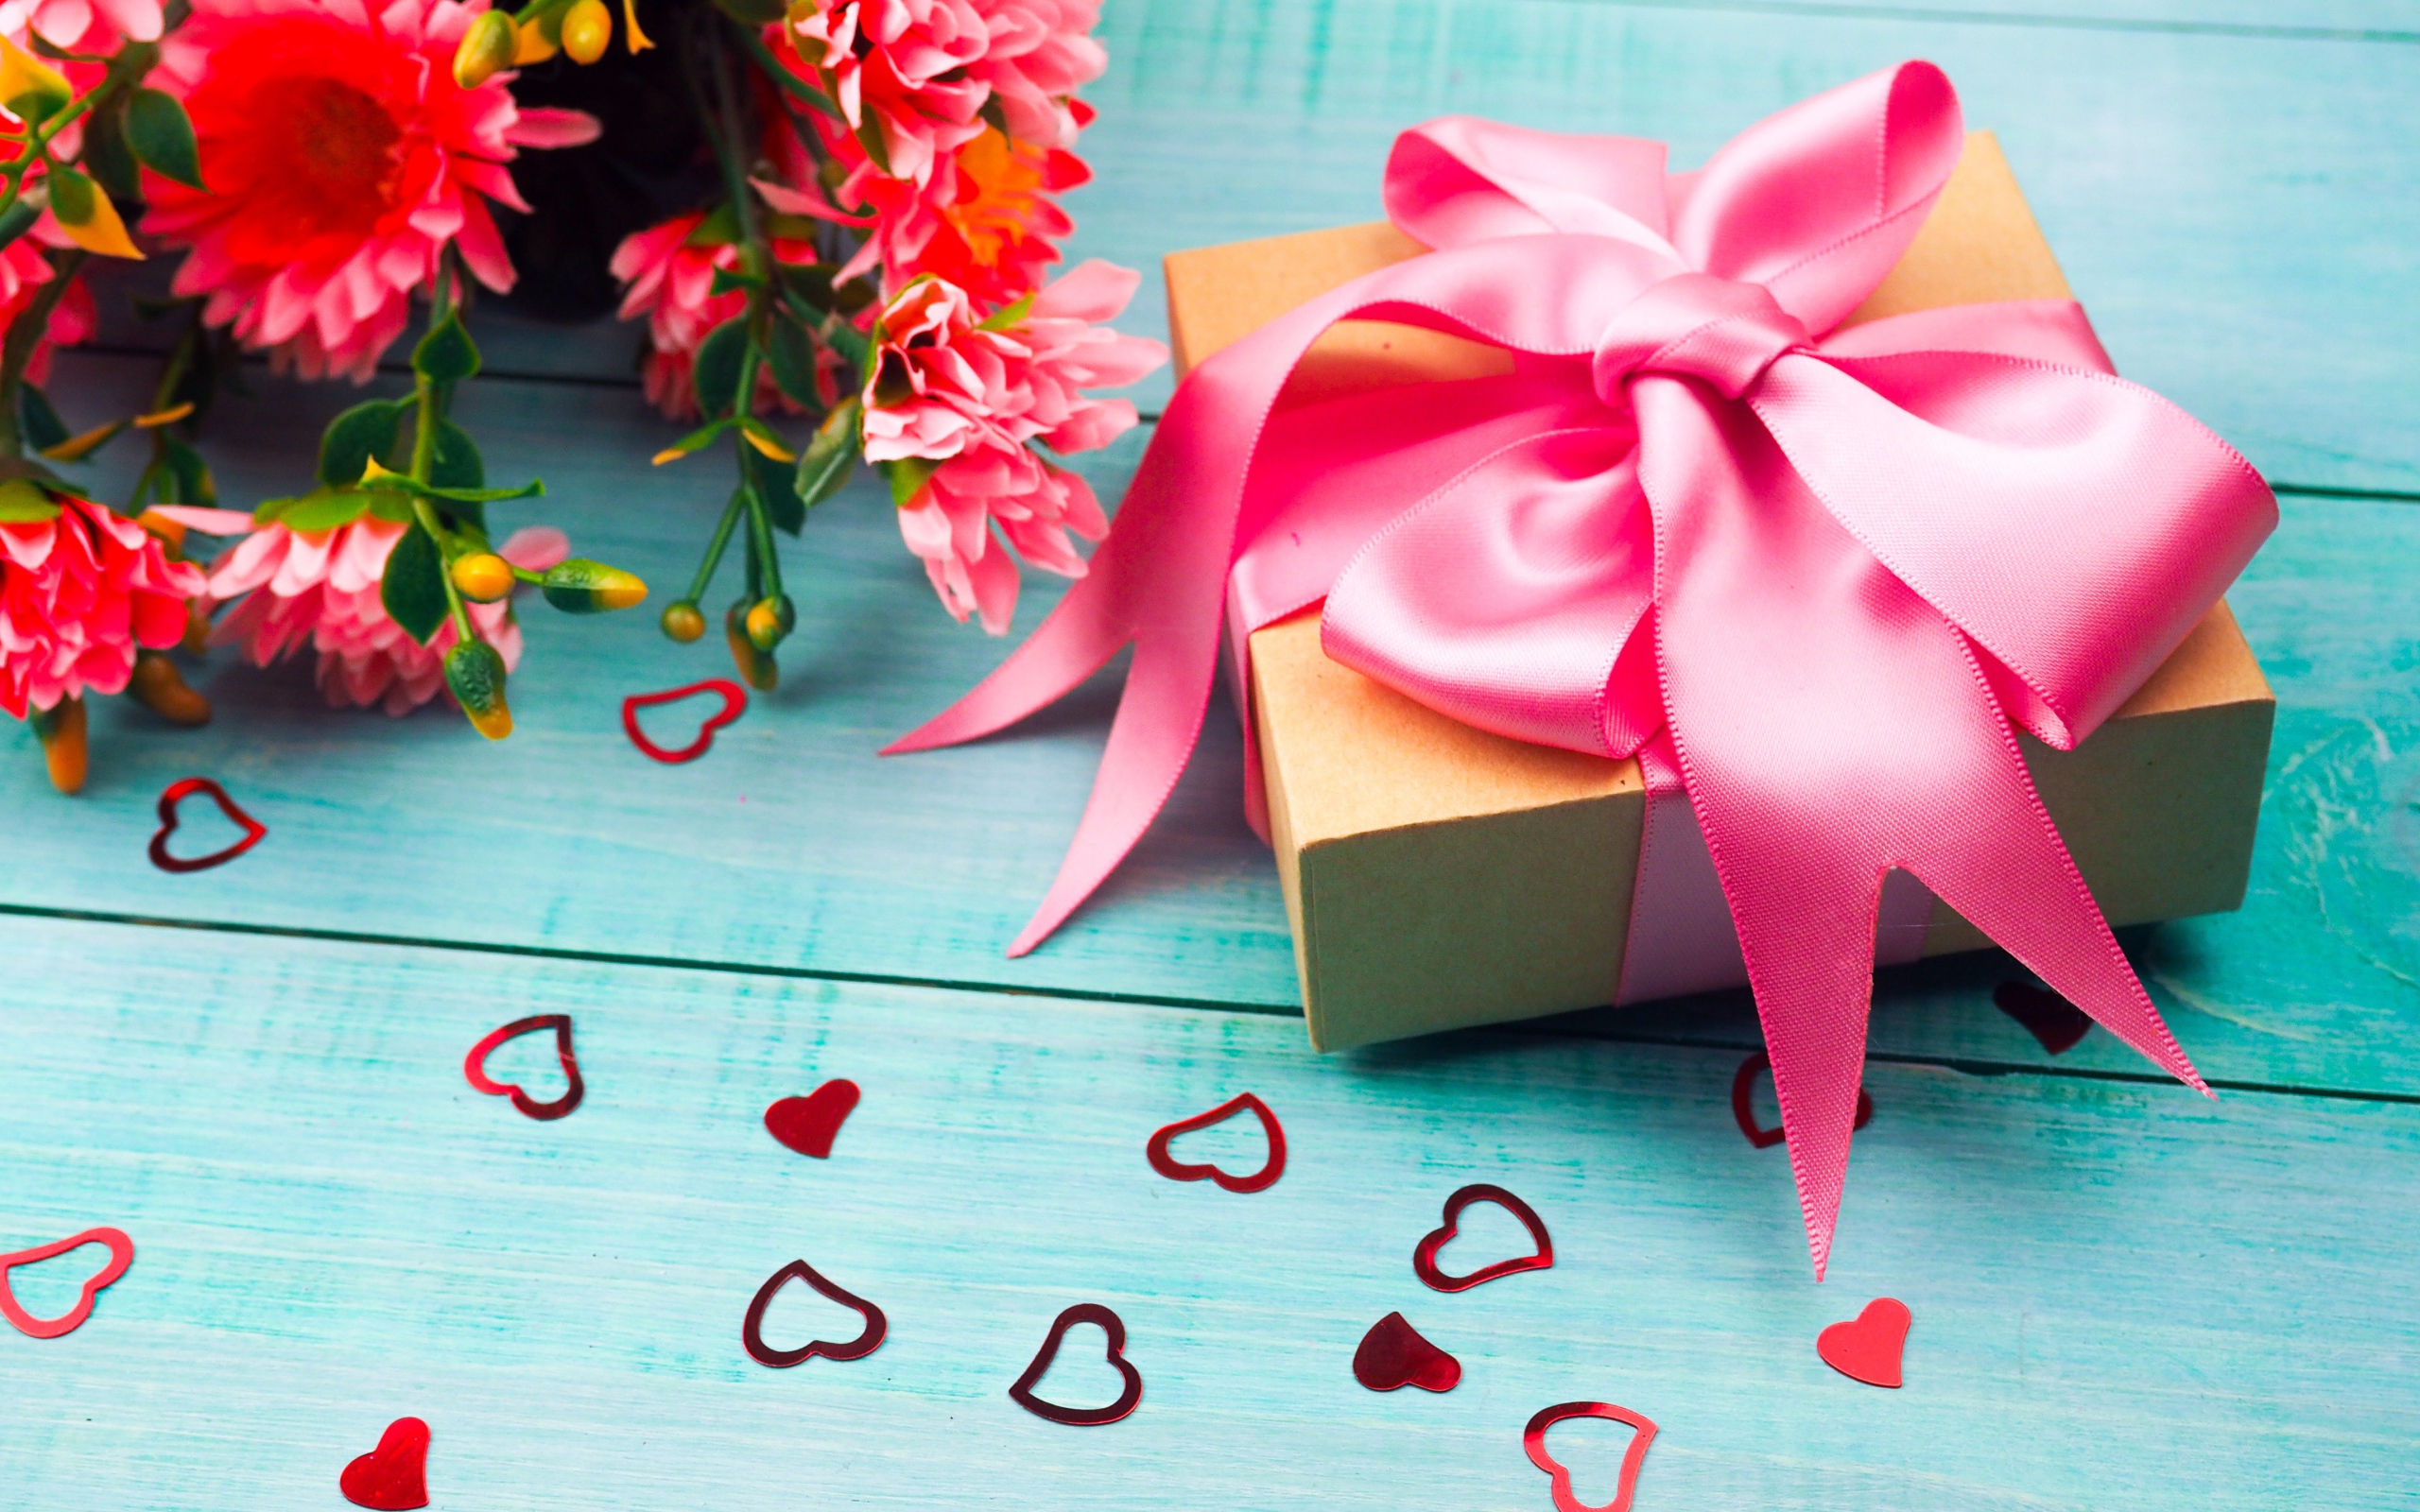 Gift with a pink bow on a blue table with a bouquet